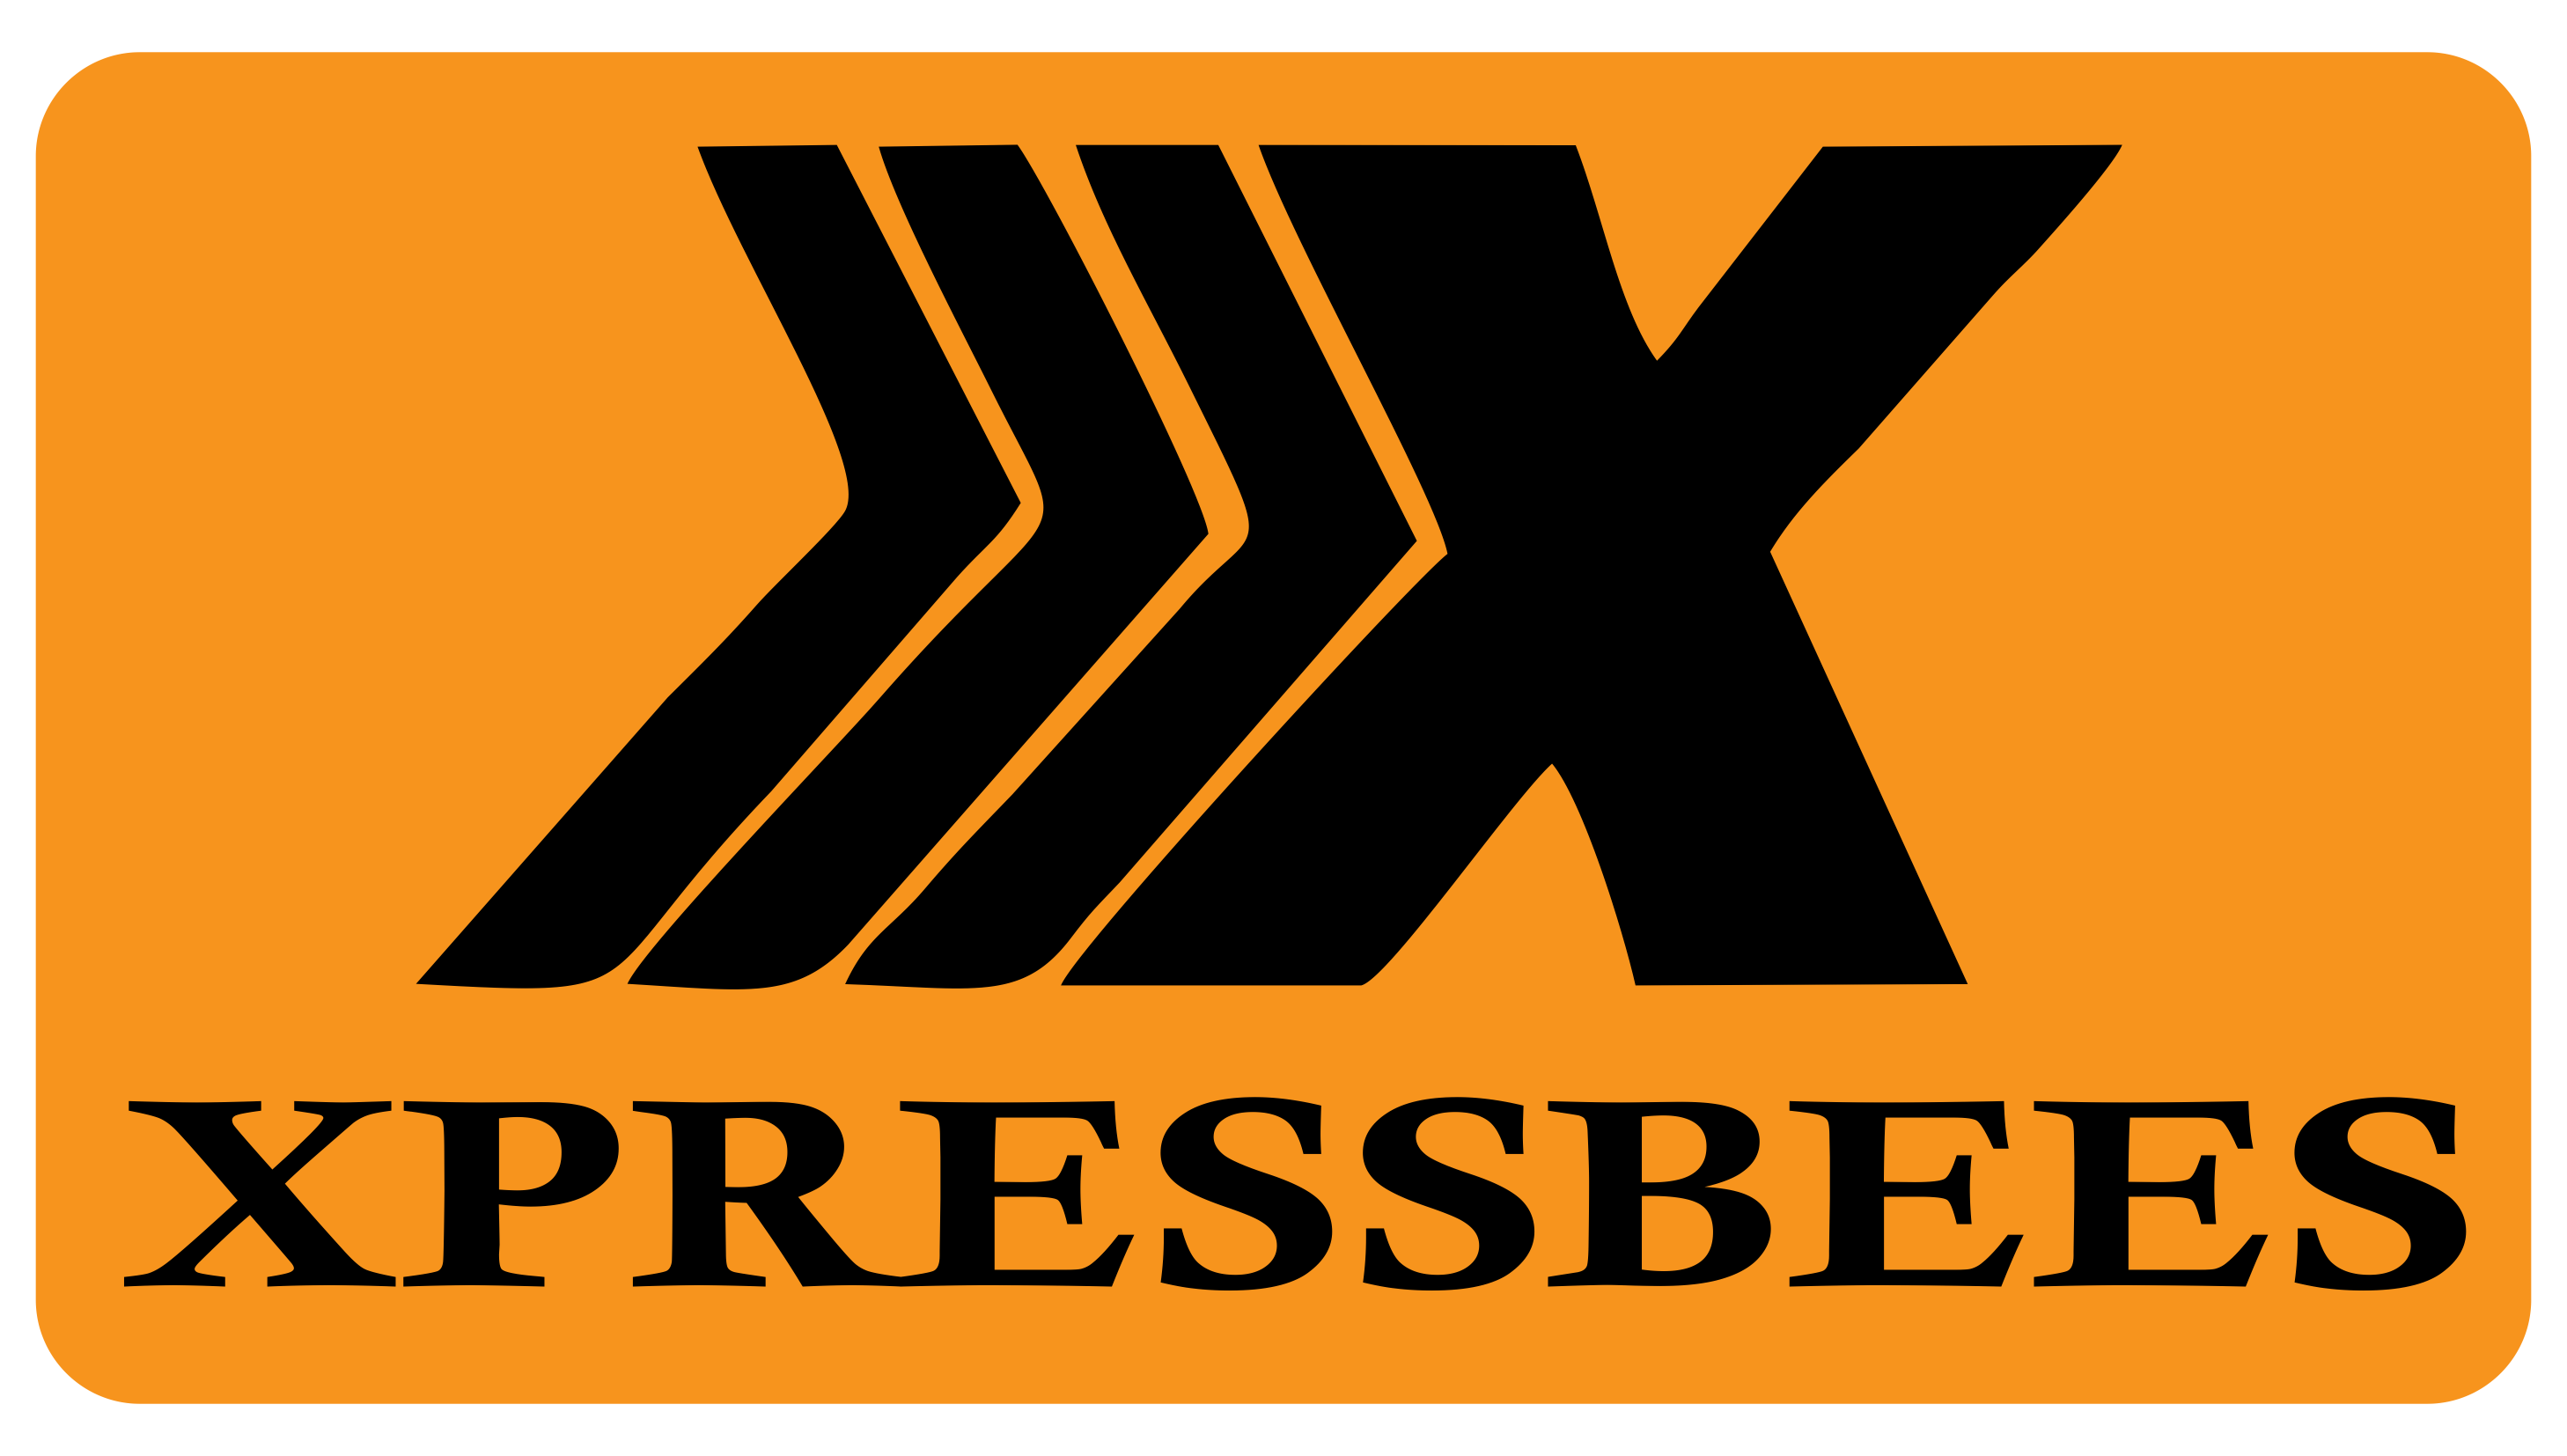 Suraj Bangera is appointed senior vice president by Xpressbees ...